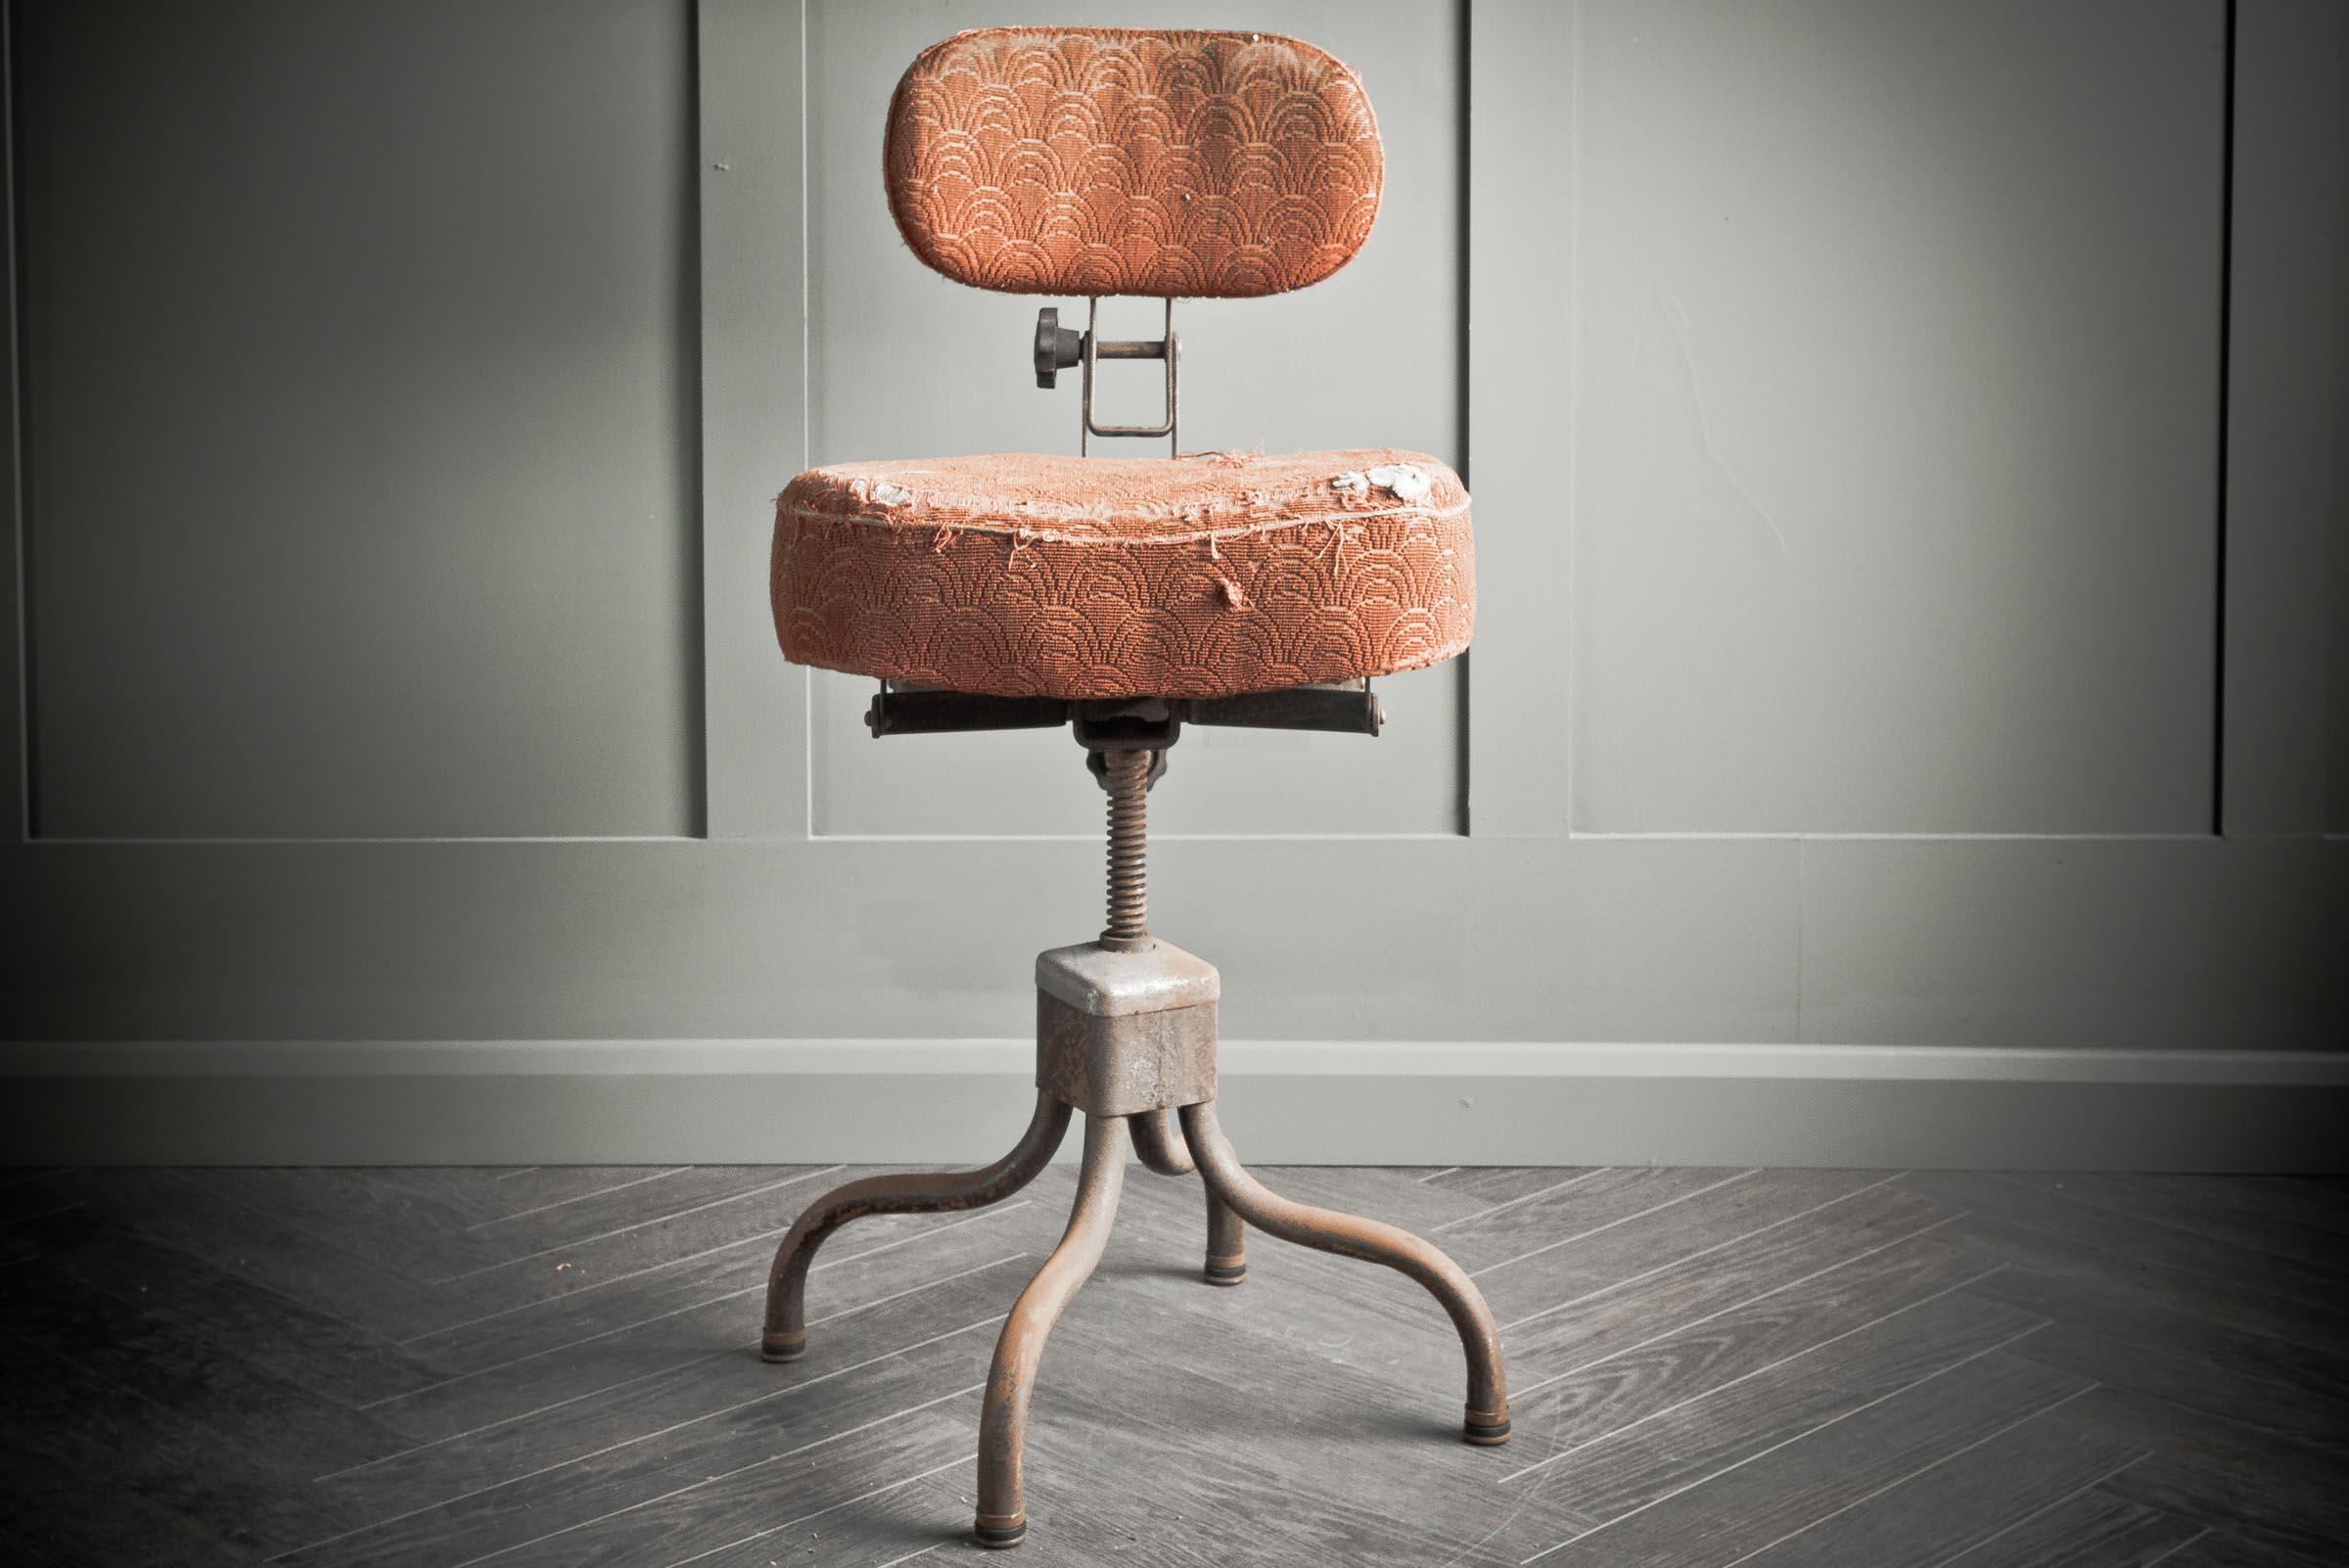 A functional and practical industrial “Evertaut”  stool circa 1940s. Covered in a red boucle with fading to authentically show age and use. A very comfortable and ergonomic chair. Adjustable back, seat and height mechanism. Original Evertaut factory